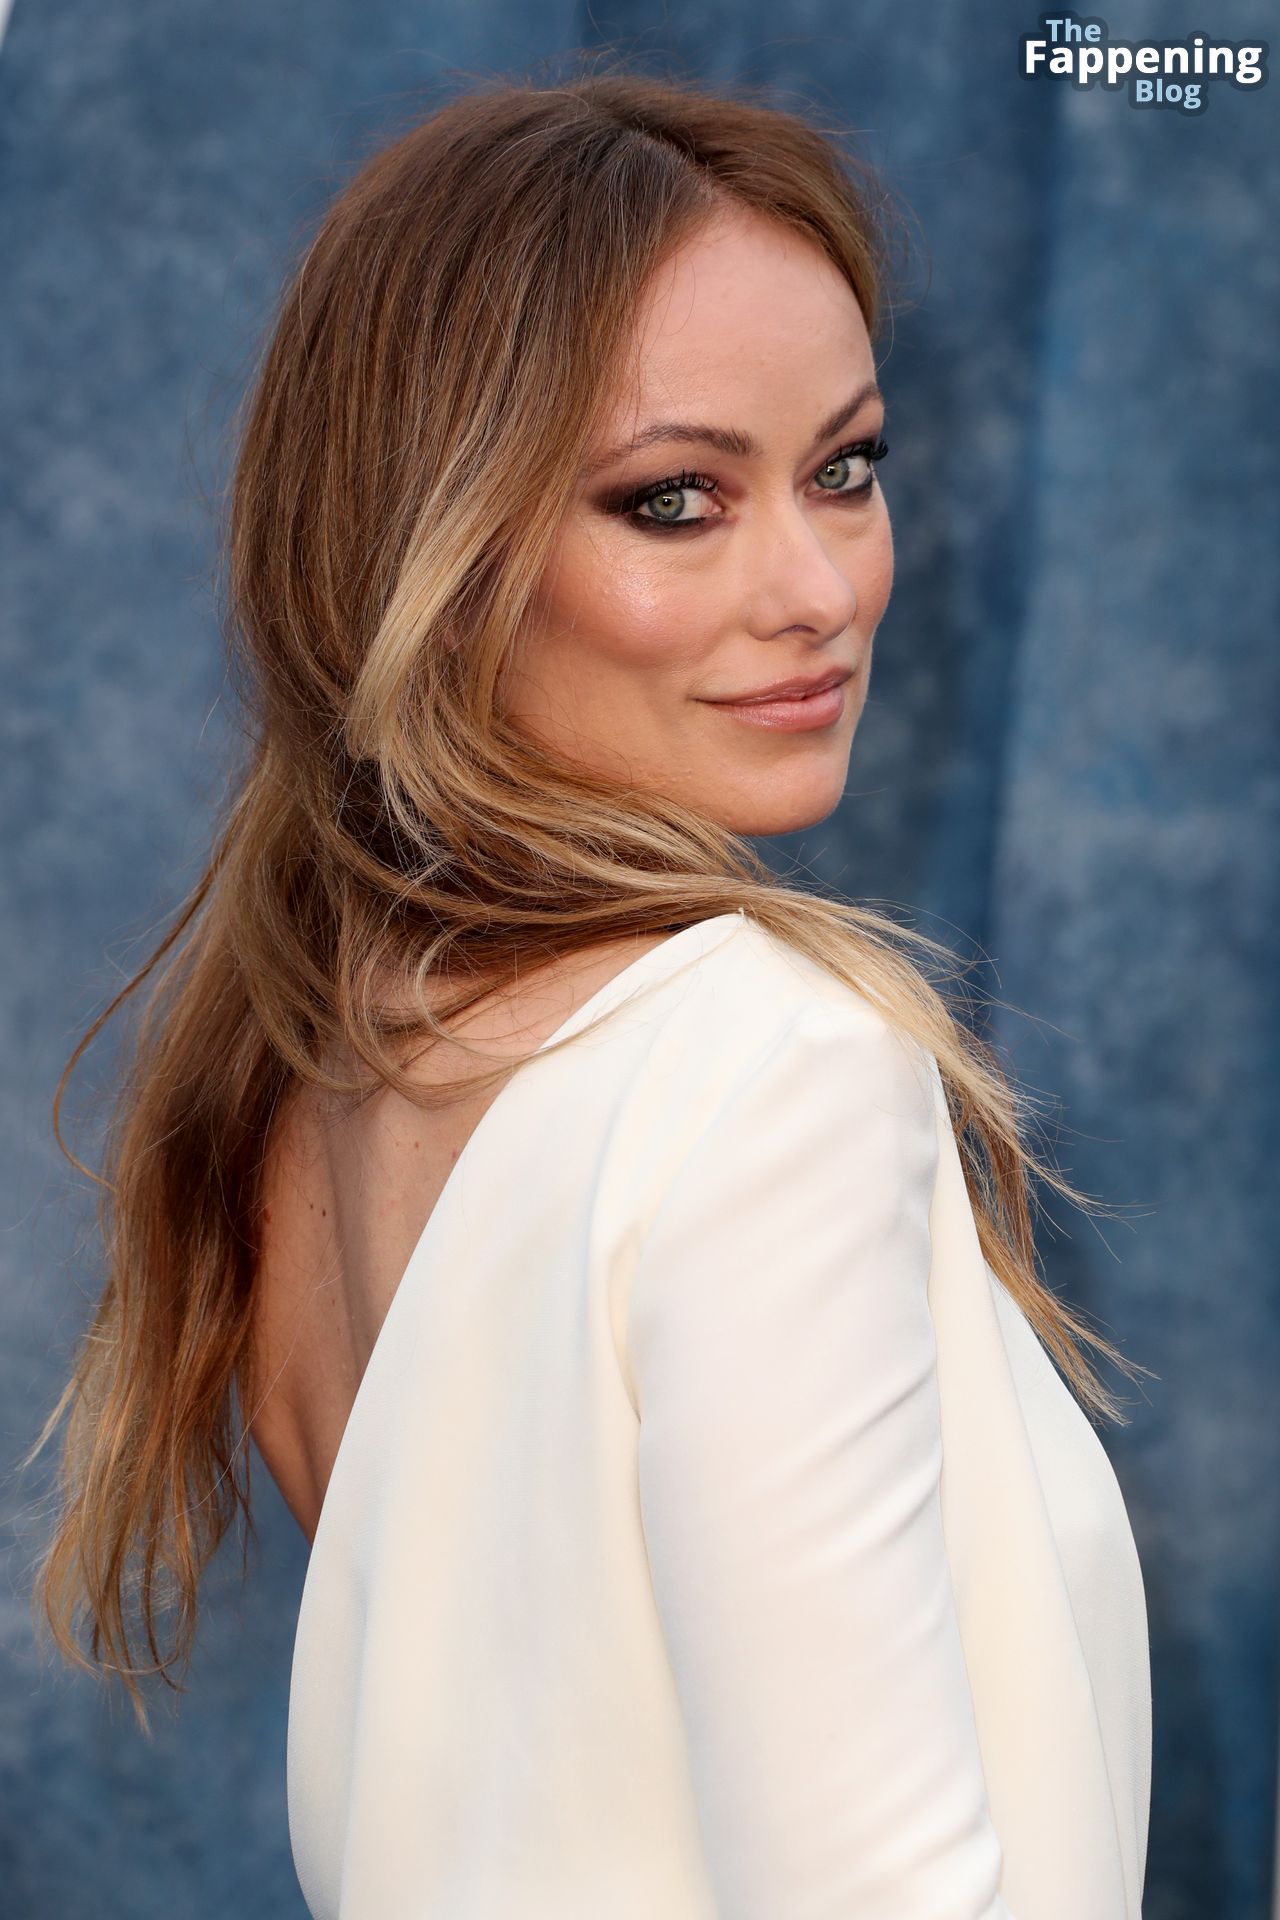 Olivia-Wilde-Sexy-The-Fappening-Blog-8-2.jpg